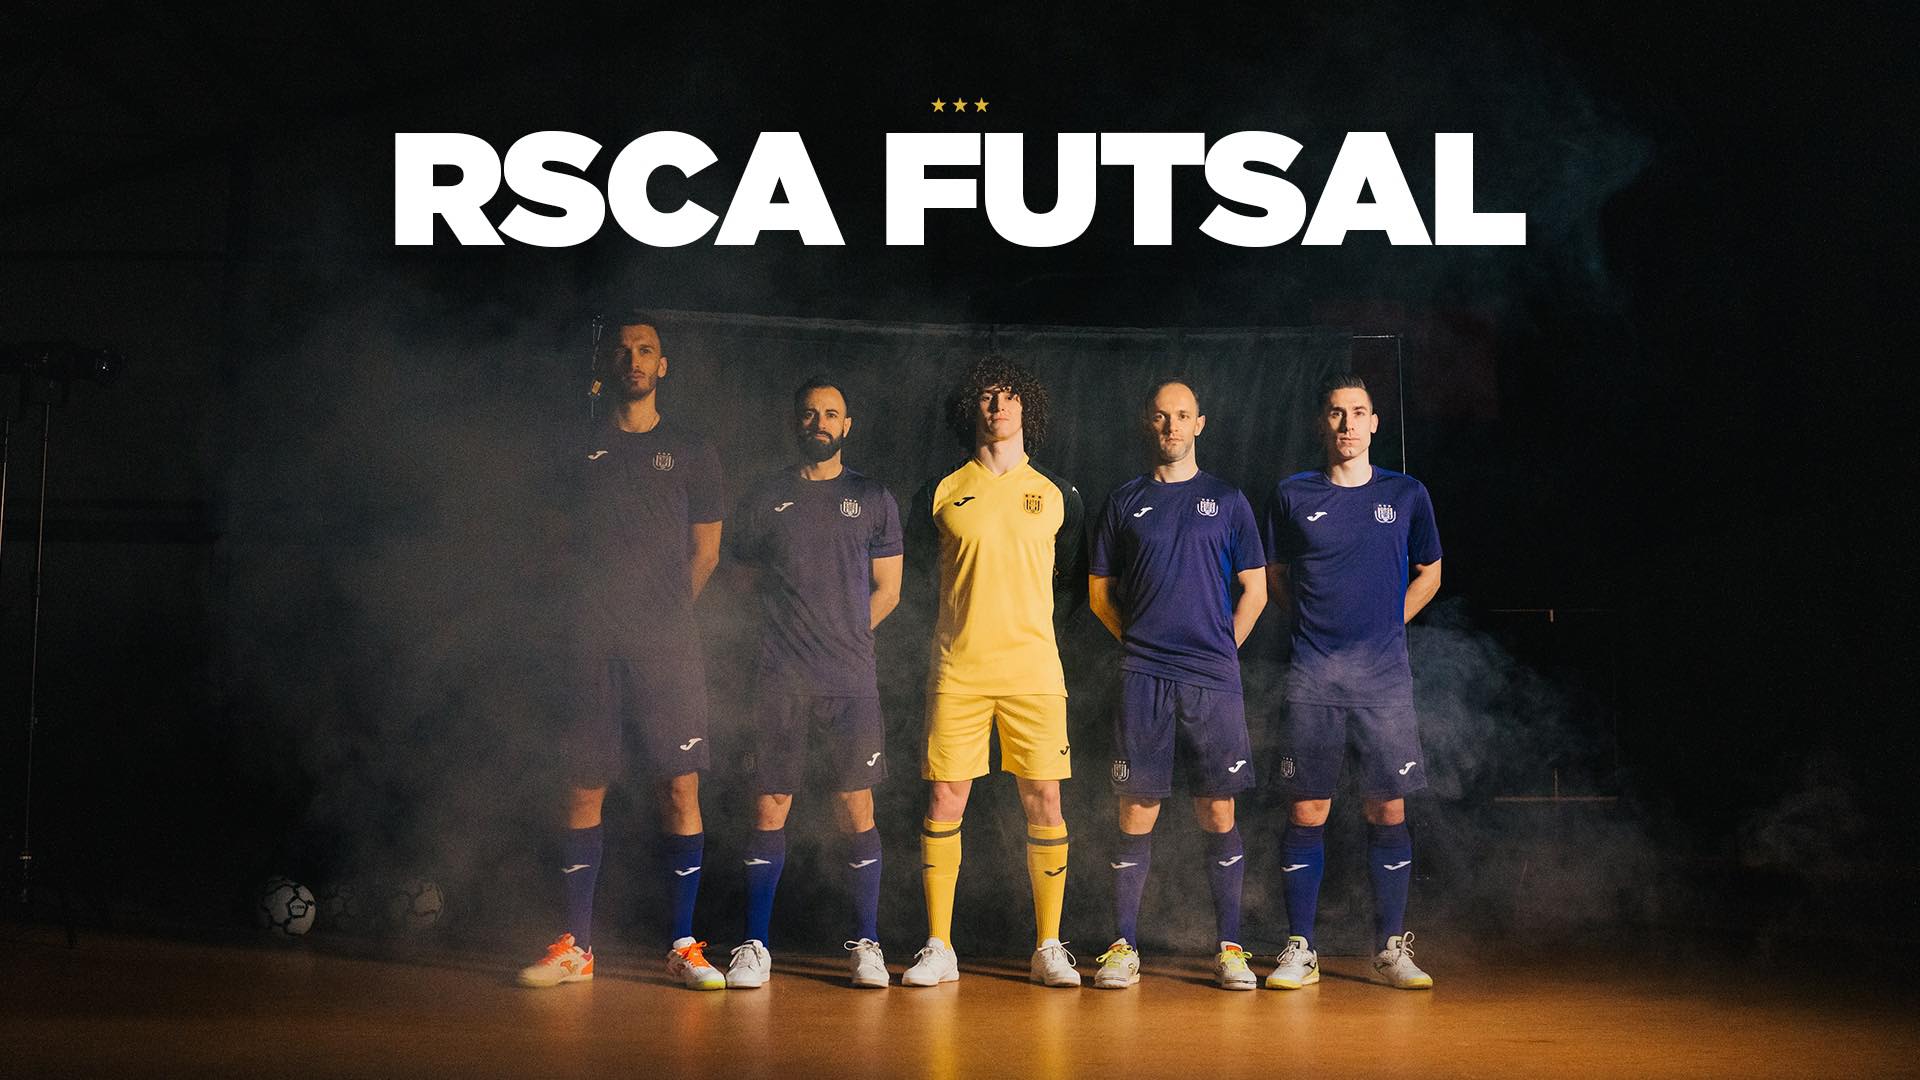 RSC Anderlecht Futsal aims to be among the top four clubs in the UEFA Futsal Champions League